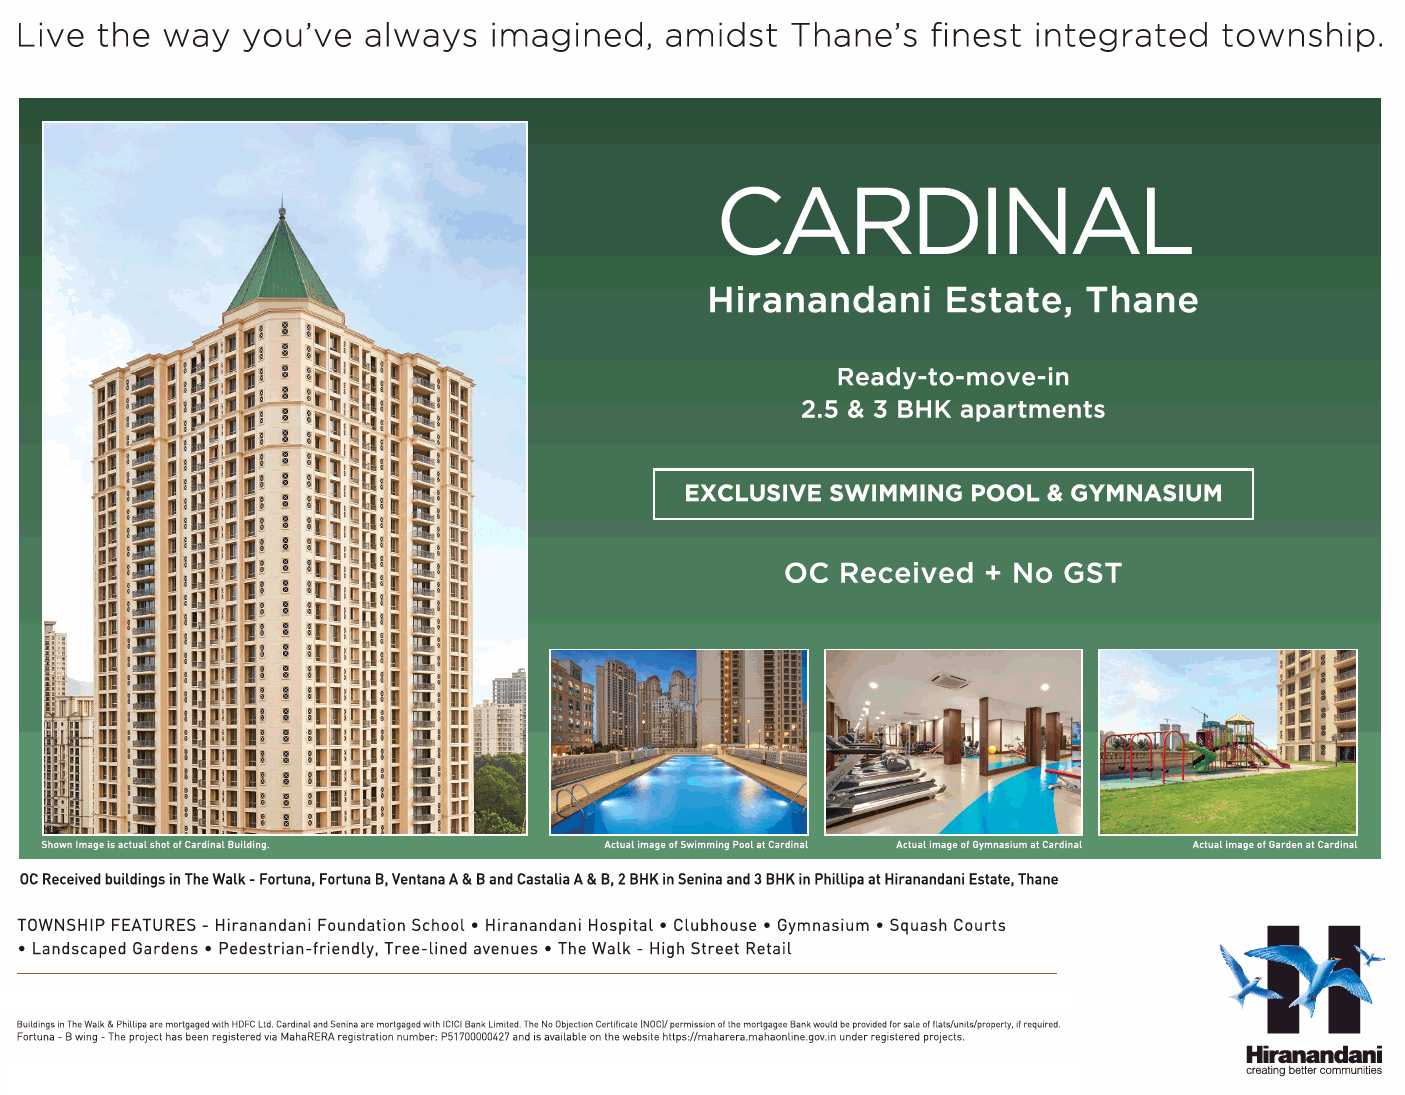 Book ready to move-in 2.5 & 3 BHK apartments at Hiranandani Estate Cardinal in Mumbai Update